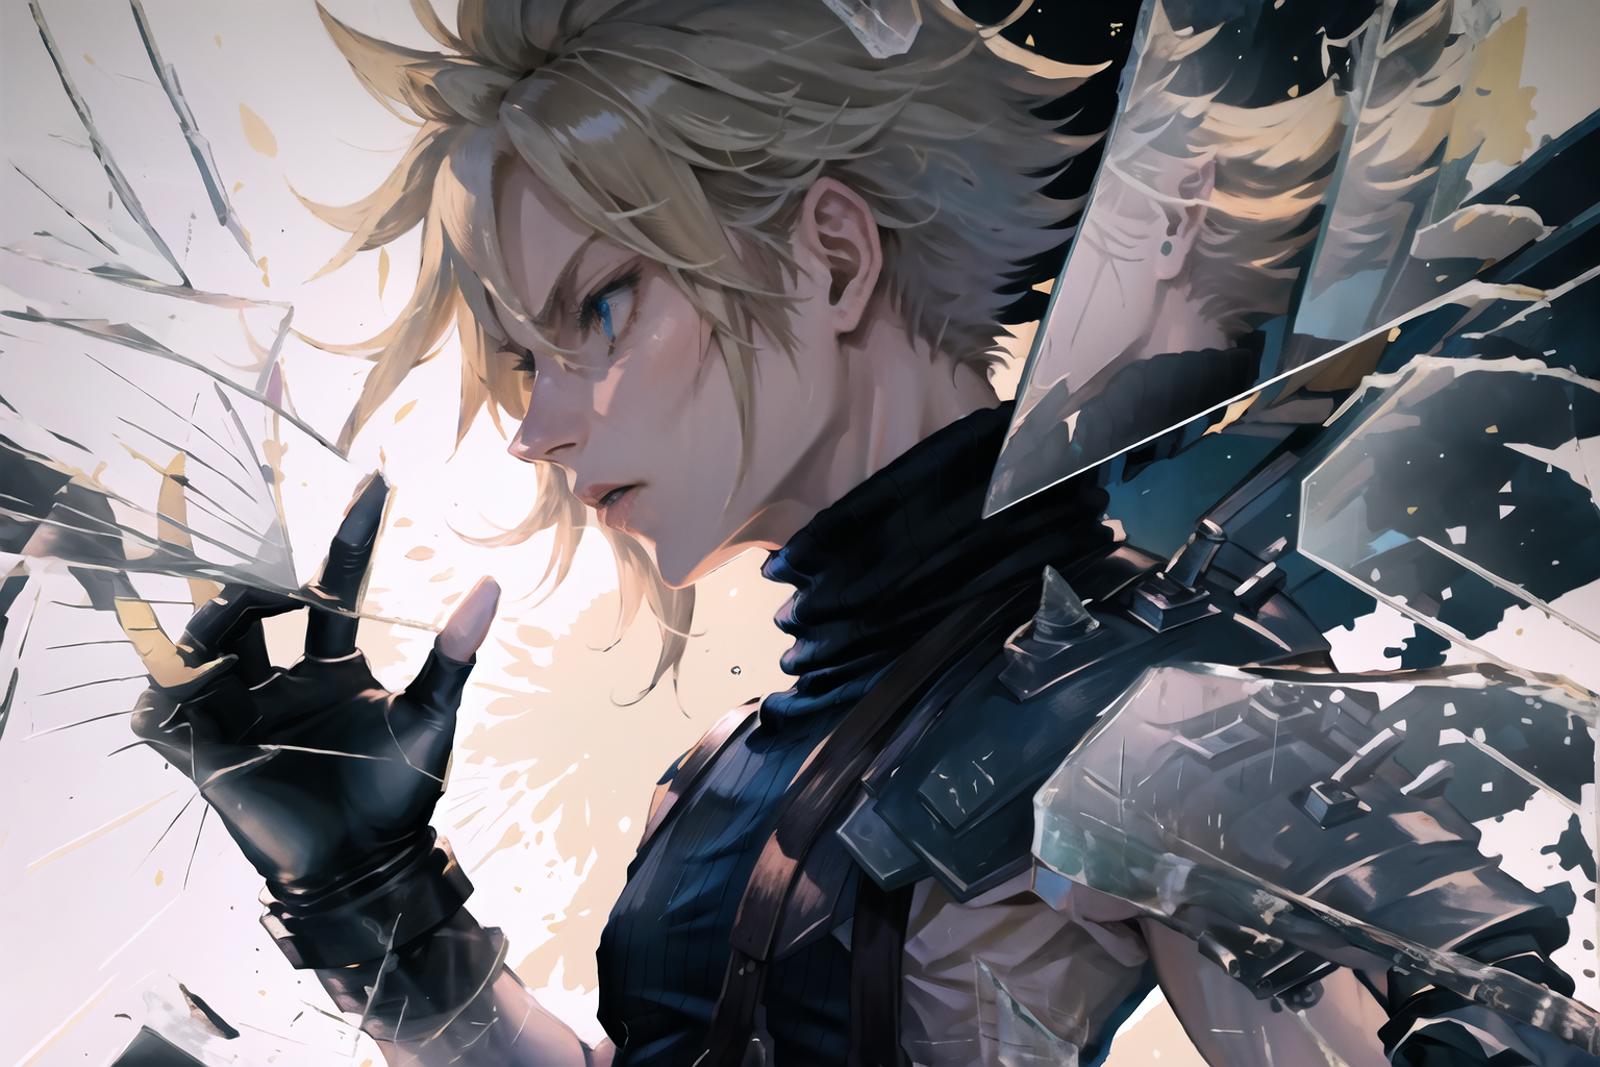 Anime character with blue eyes and blond hair holding a shattered glass.